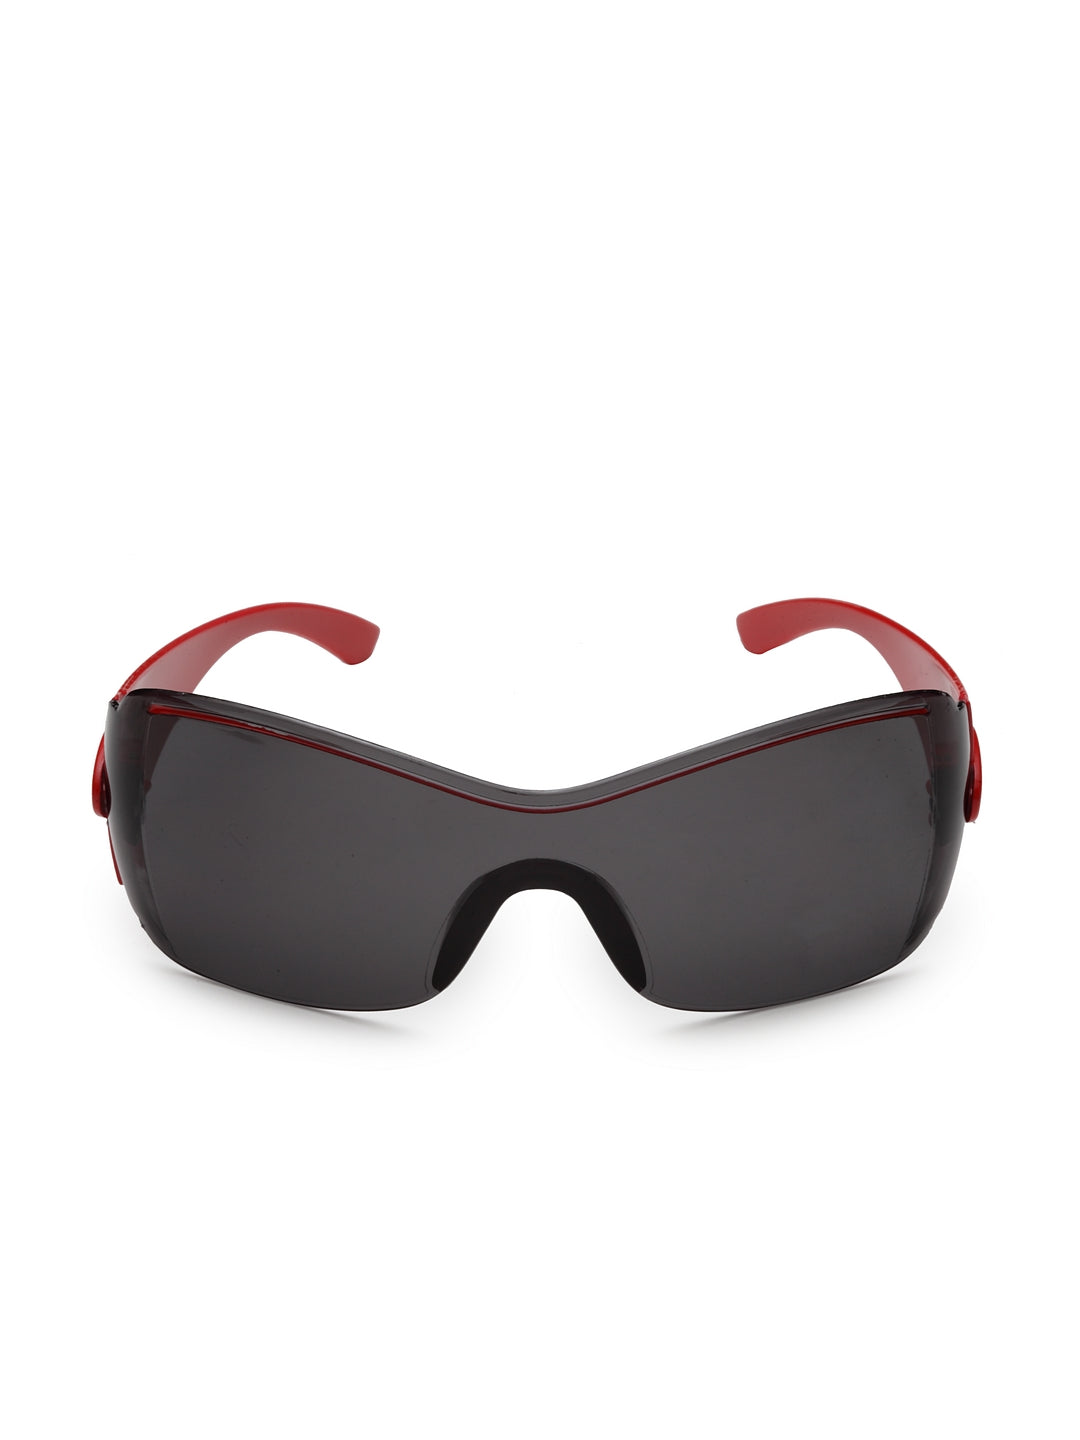 Stol'n Premium Attractive Fashionable UV-Protected Sports Sunglasses - Black and Red